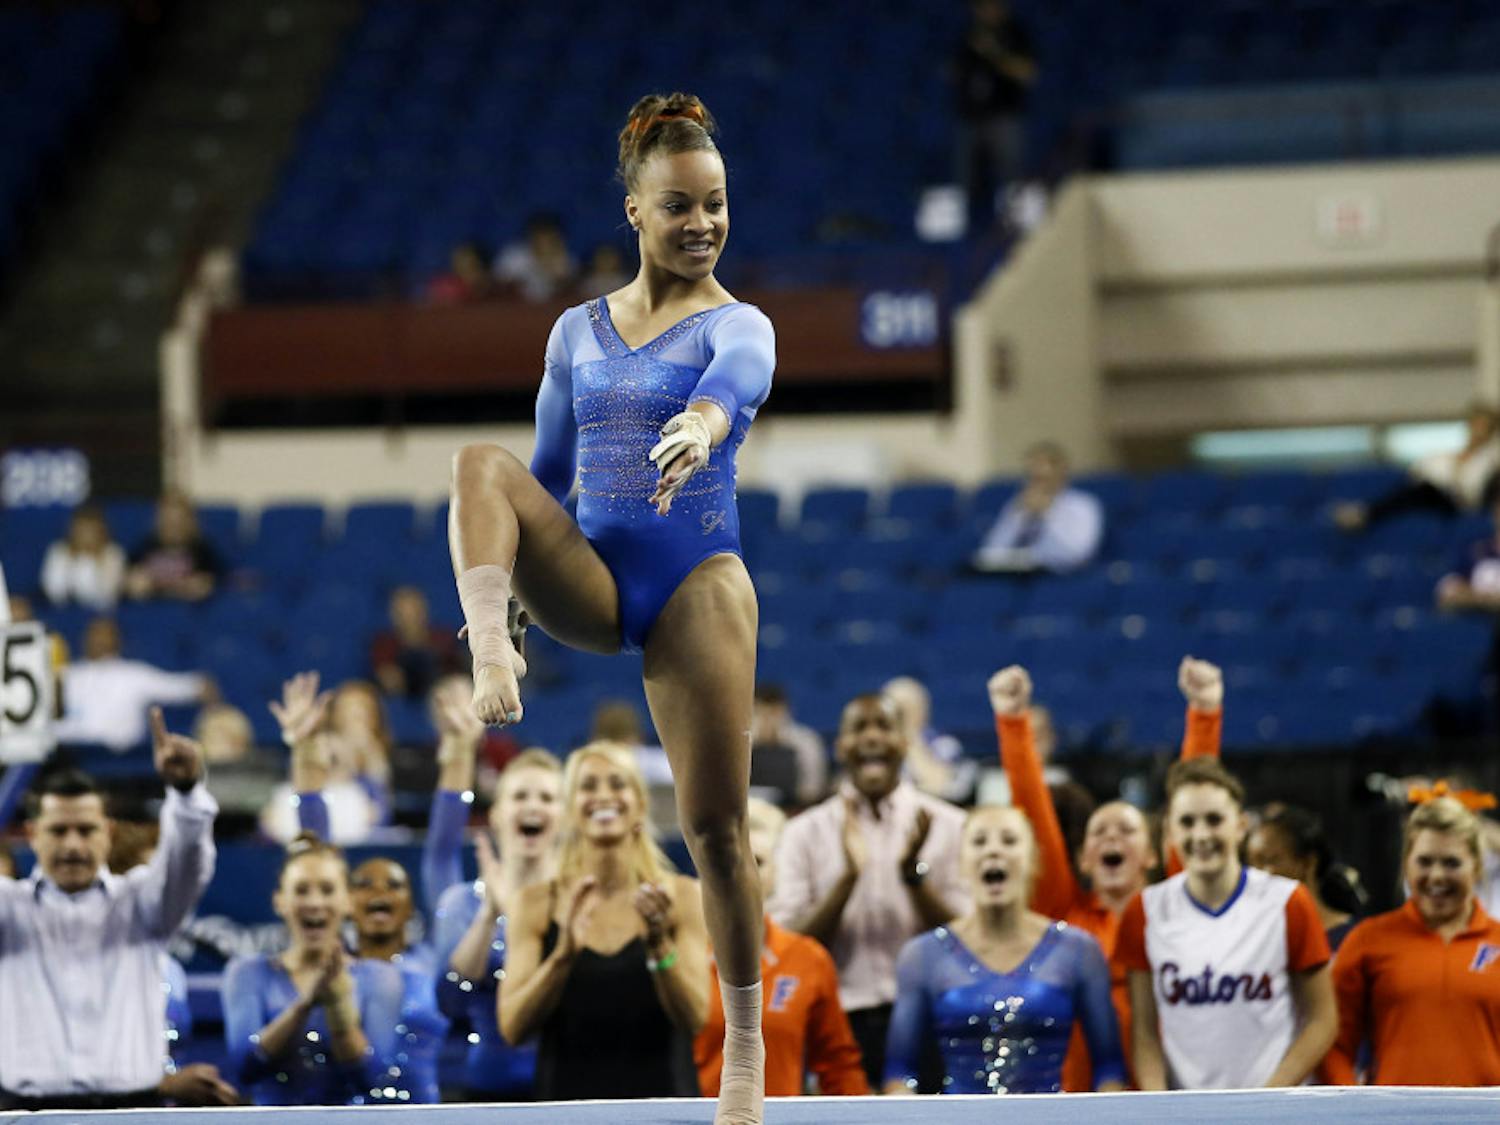 Florida's Kytra Hunter draws support from her team, rear, as she runs through her floor exercise routine during the NCAA women's Gymnastics Championships Friday, April 17, 2015, in Fort Worth, Texas.